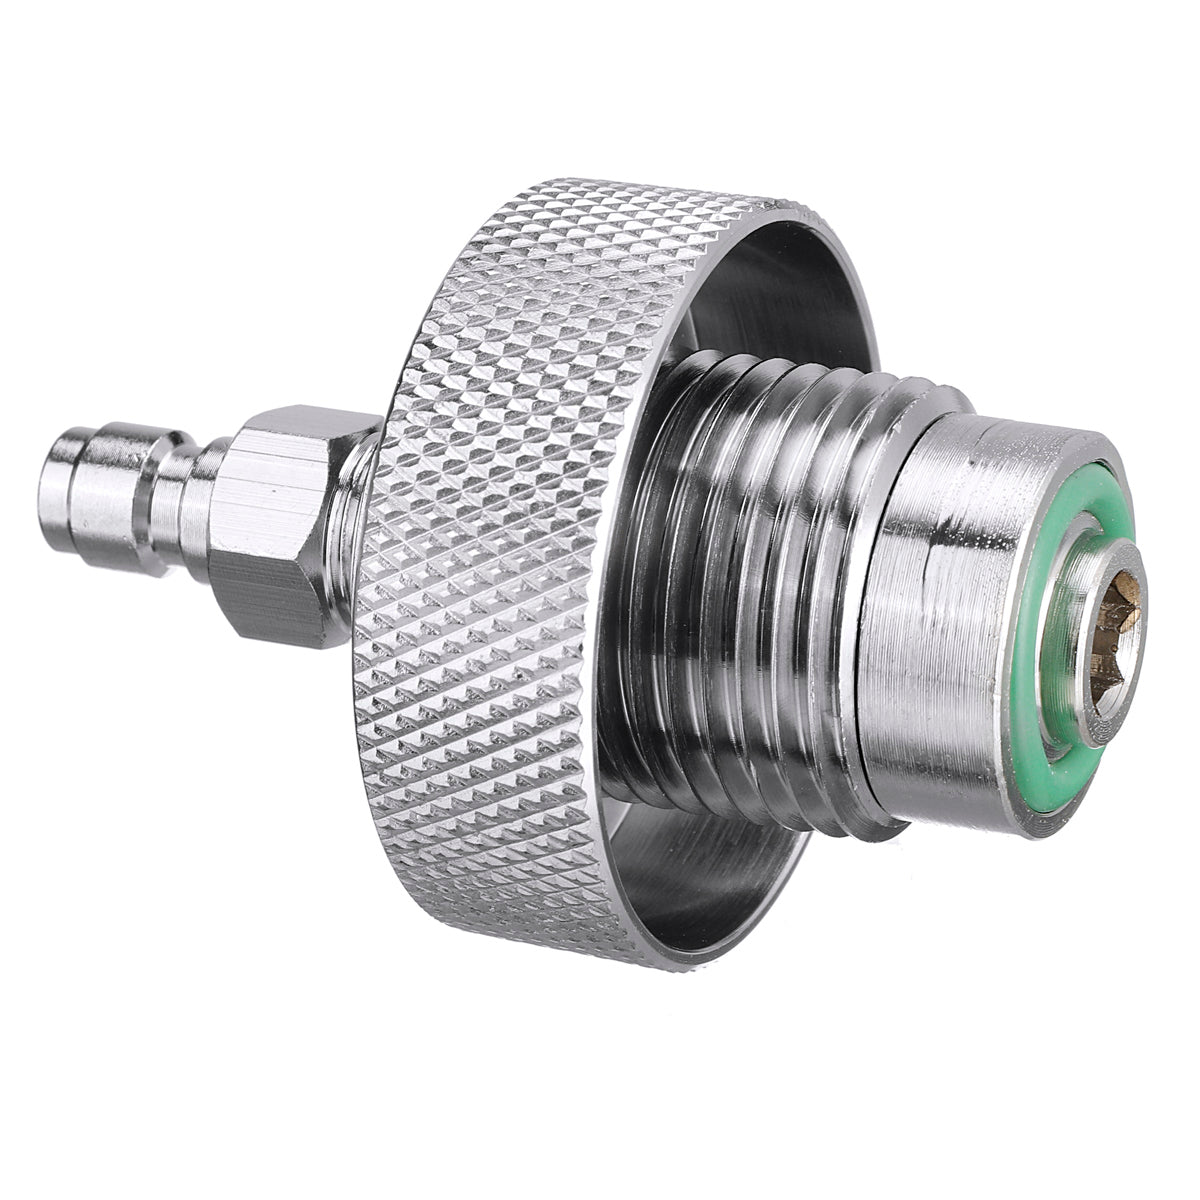 Gray Male/Female Stainless Steel 300Bar Din Valve Filling Adapter For Paintball Air Tool Air